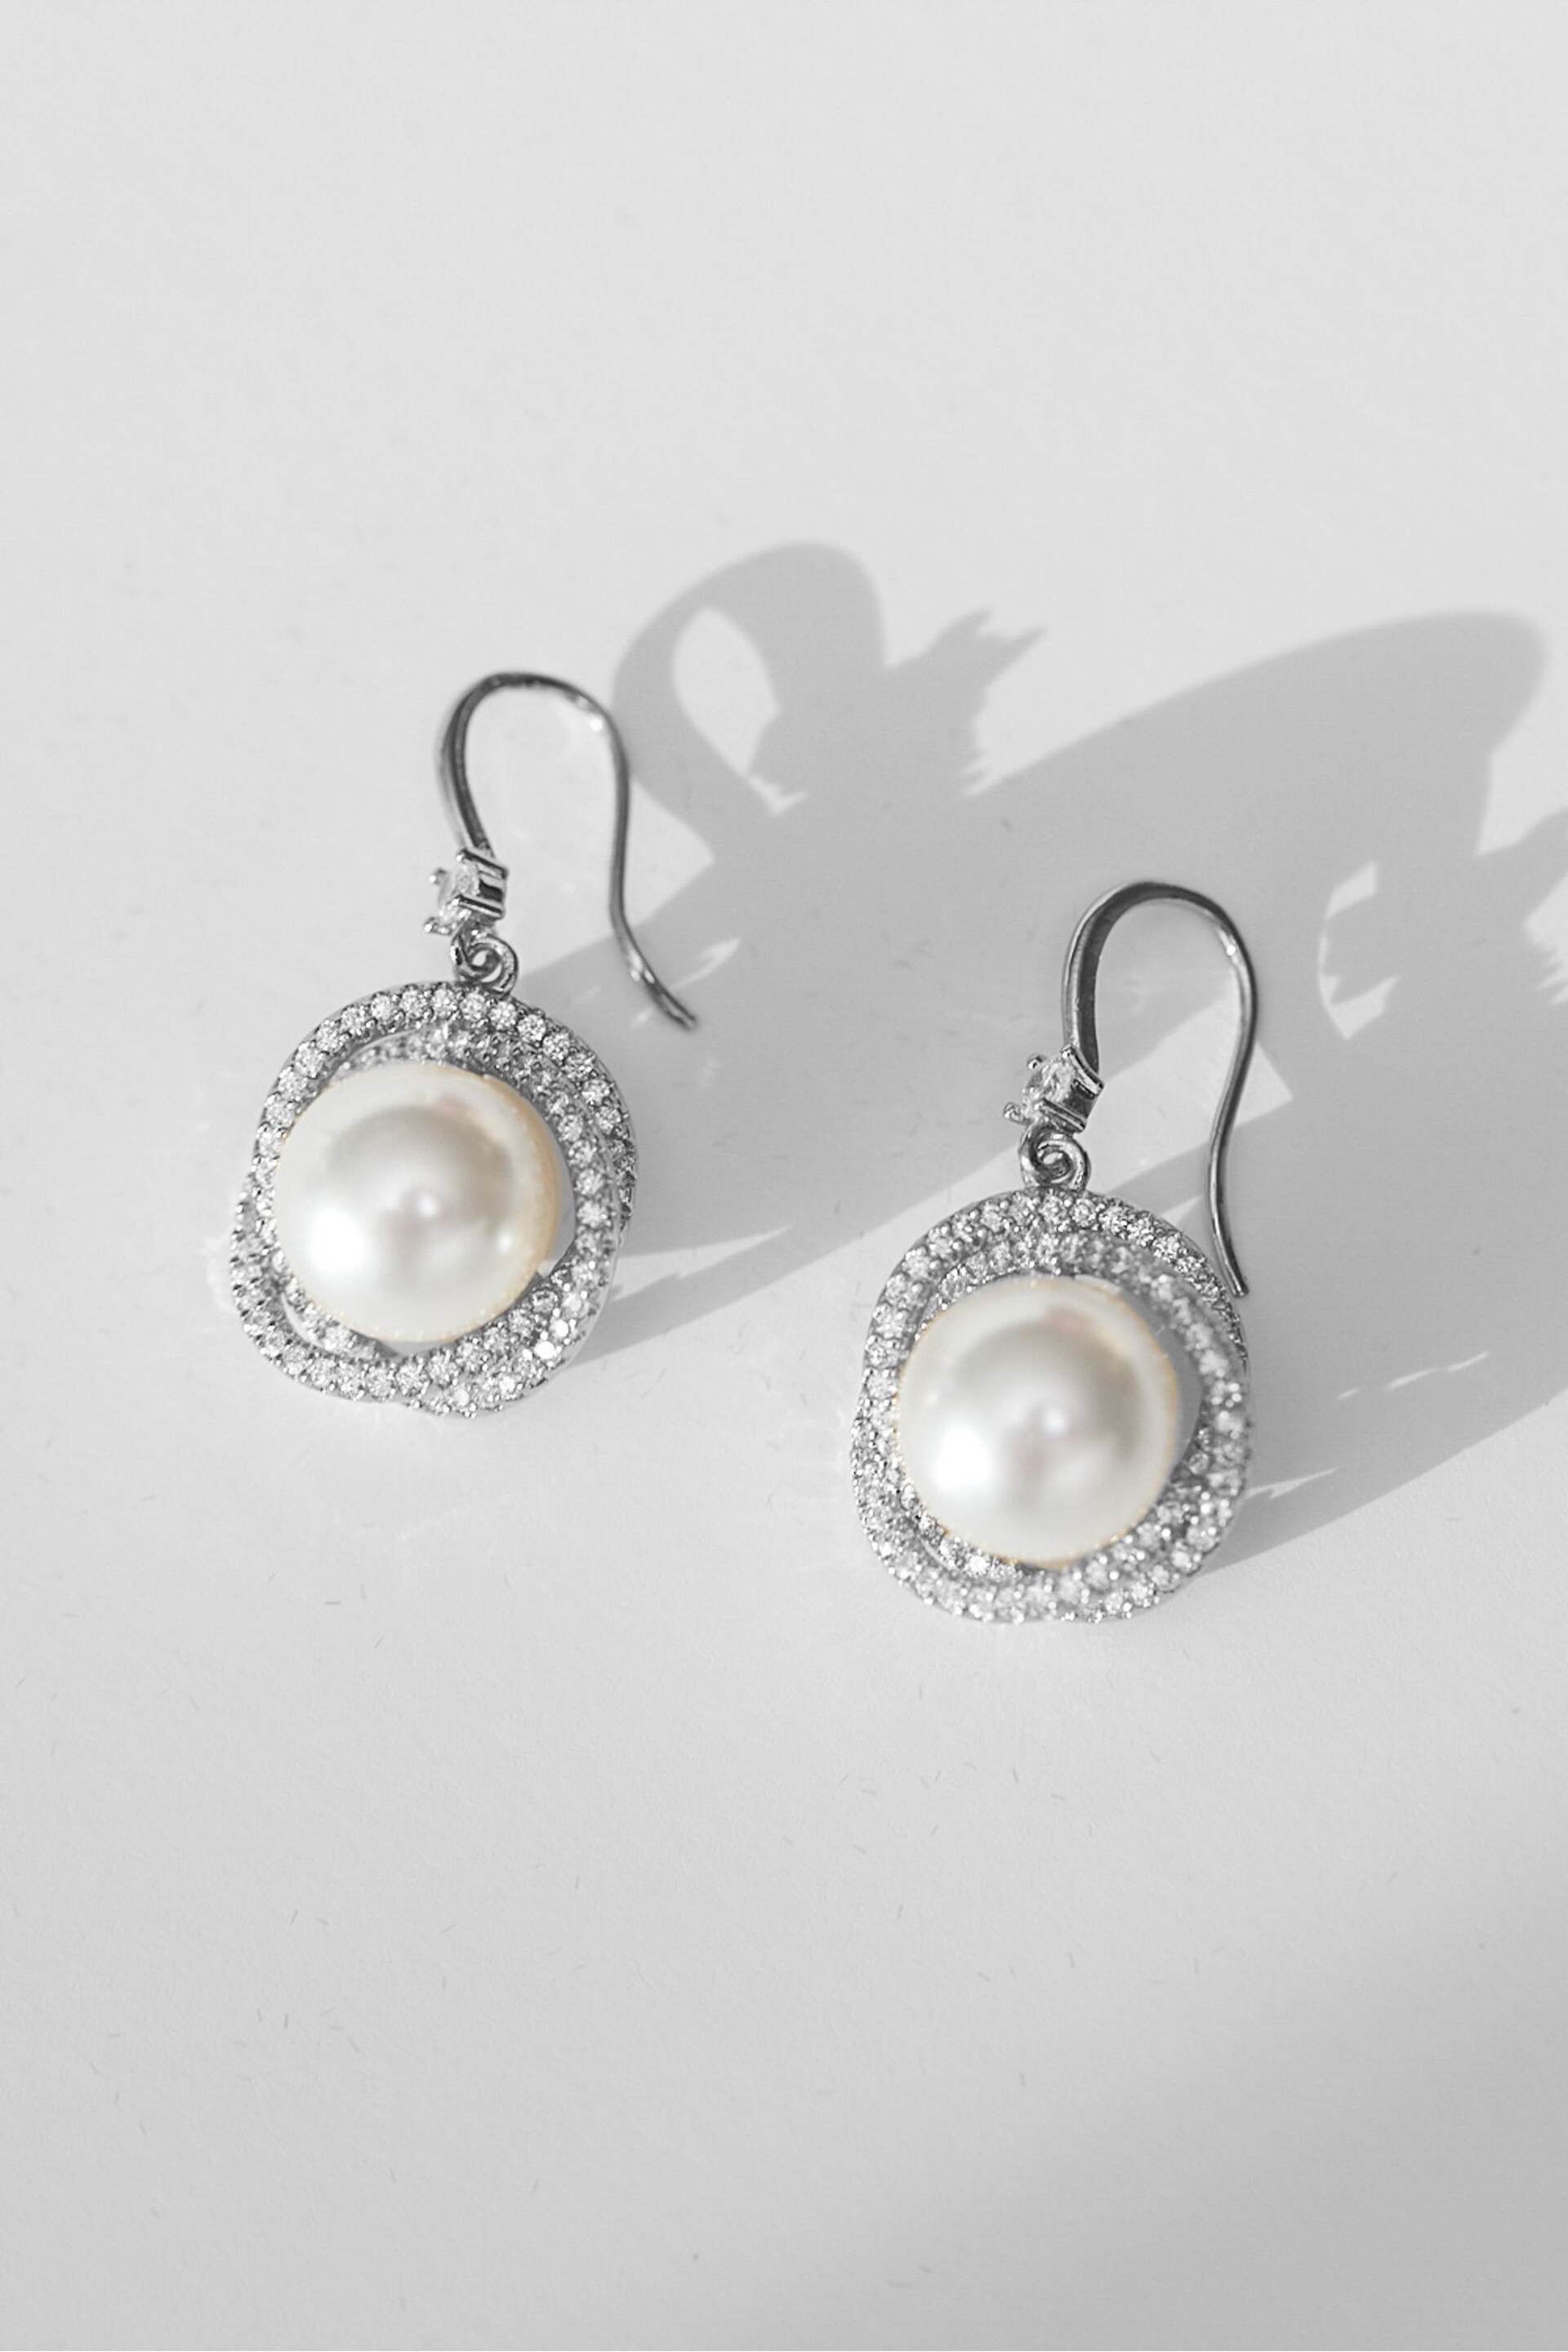 Jon Richard Silver Tone Cubic Zirconia Knotted Pearl Centre Fish Hook Drop Earrings - Image 1 of 2